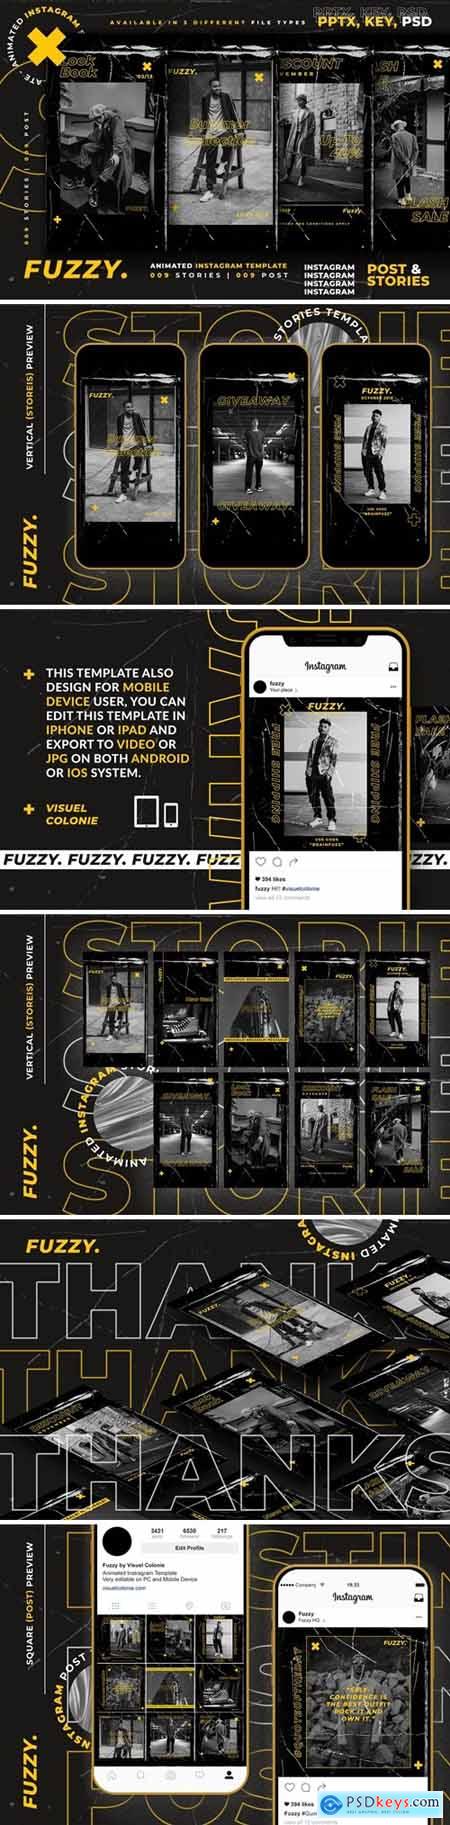 Fuzzy - Animated Instagram Template